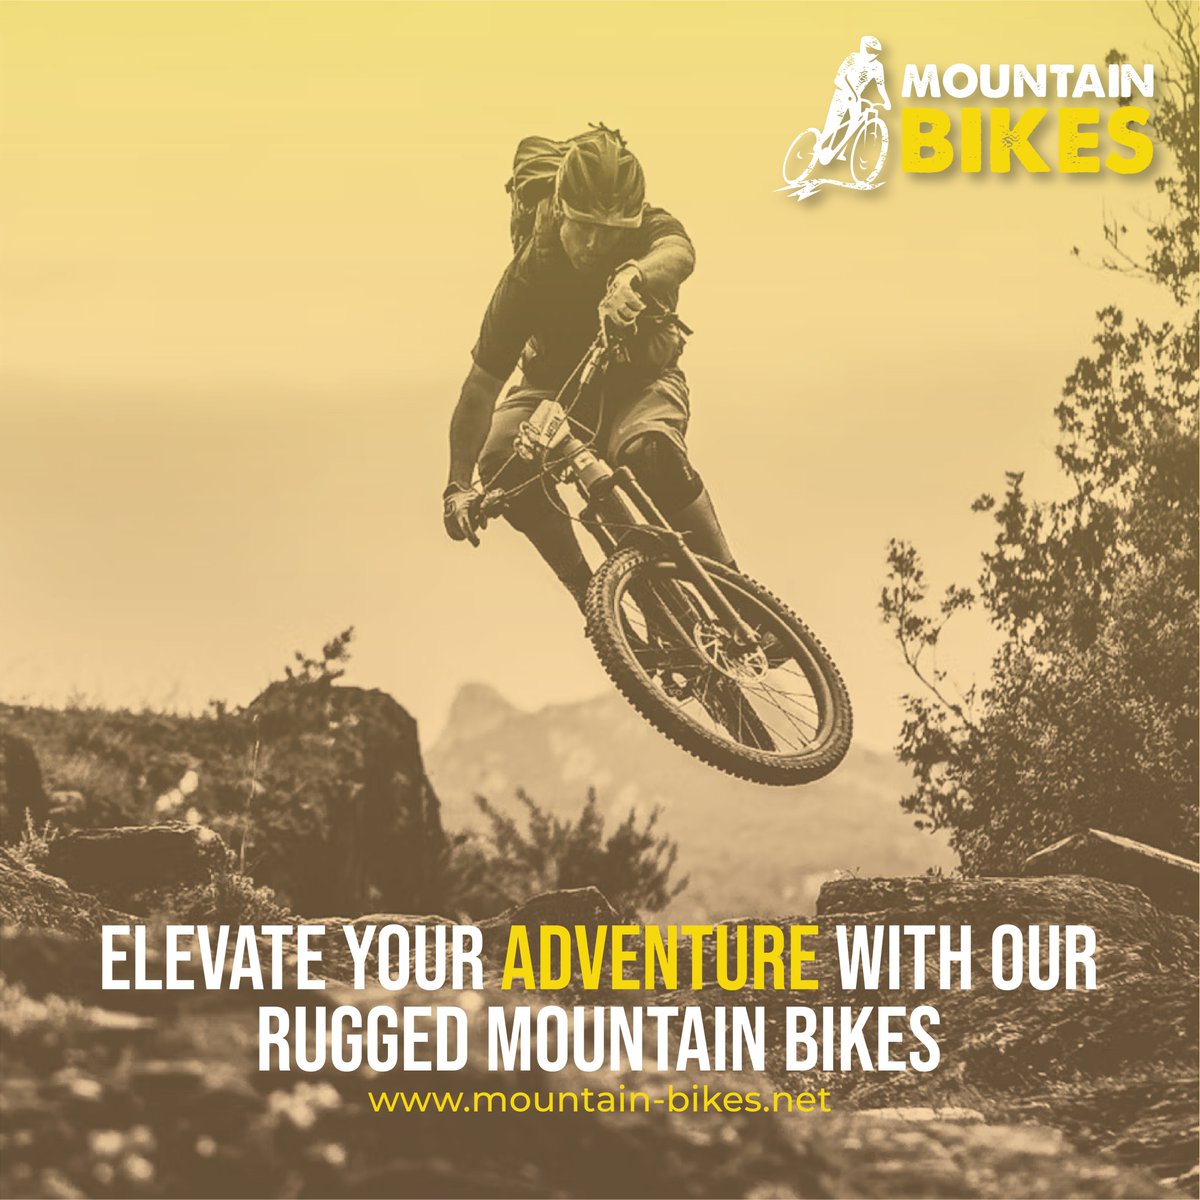 Elevate your adventure with our rugged mountain bikes! mountain-bike.net #MountainBiking #MTB #MountainBikeLife #RideMore #TrailLife #BikeAdventures #Single-track #BikeTrail #DownhillMTB